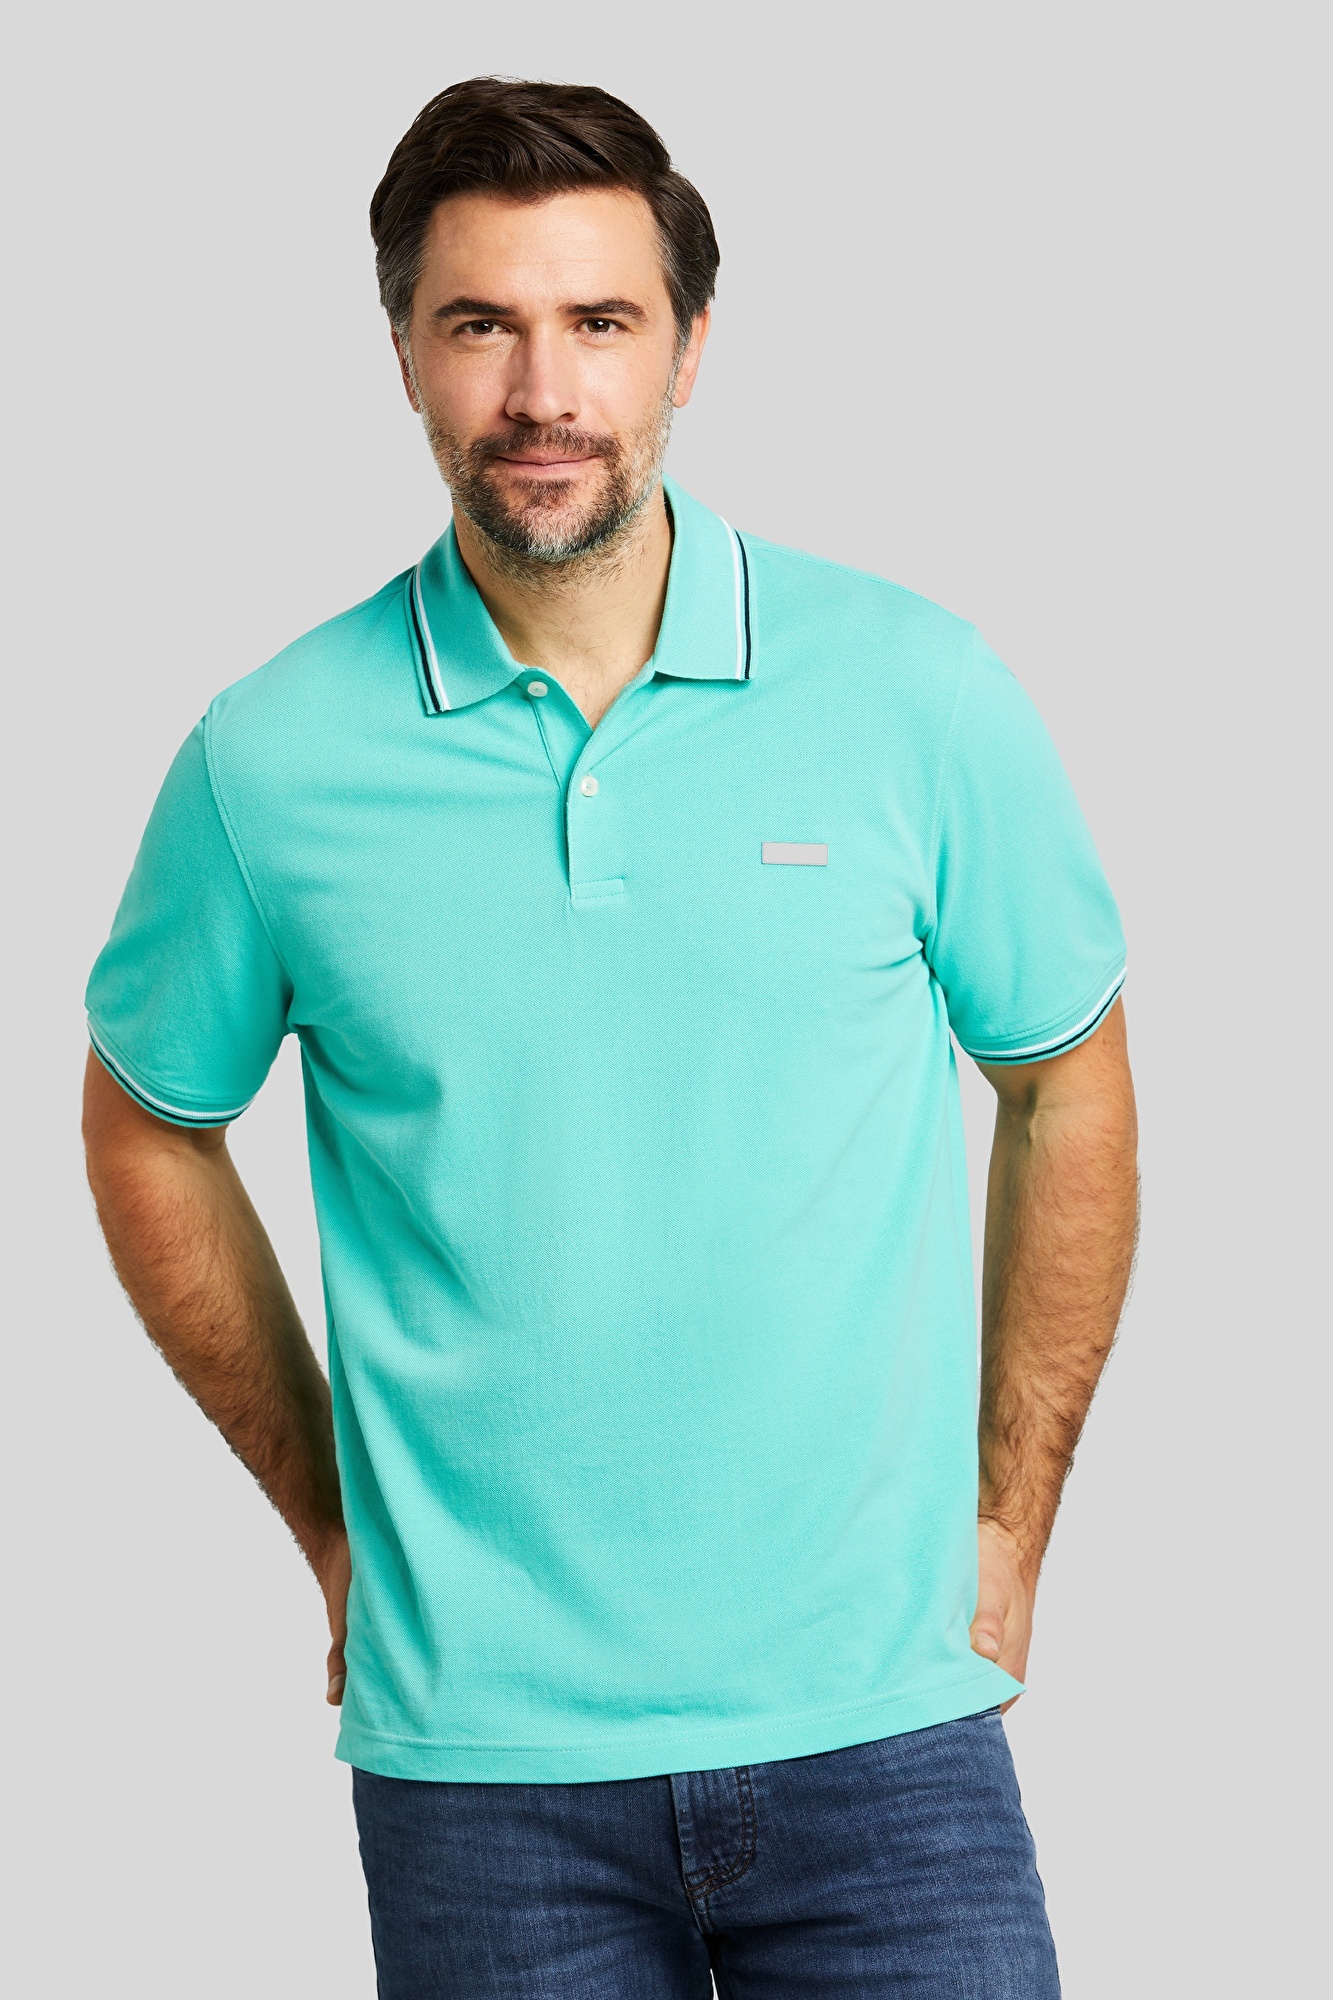 Pique polo on mint with sleeve shirt | cuffs stripes and contrasting in the collar bugatti